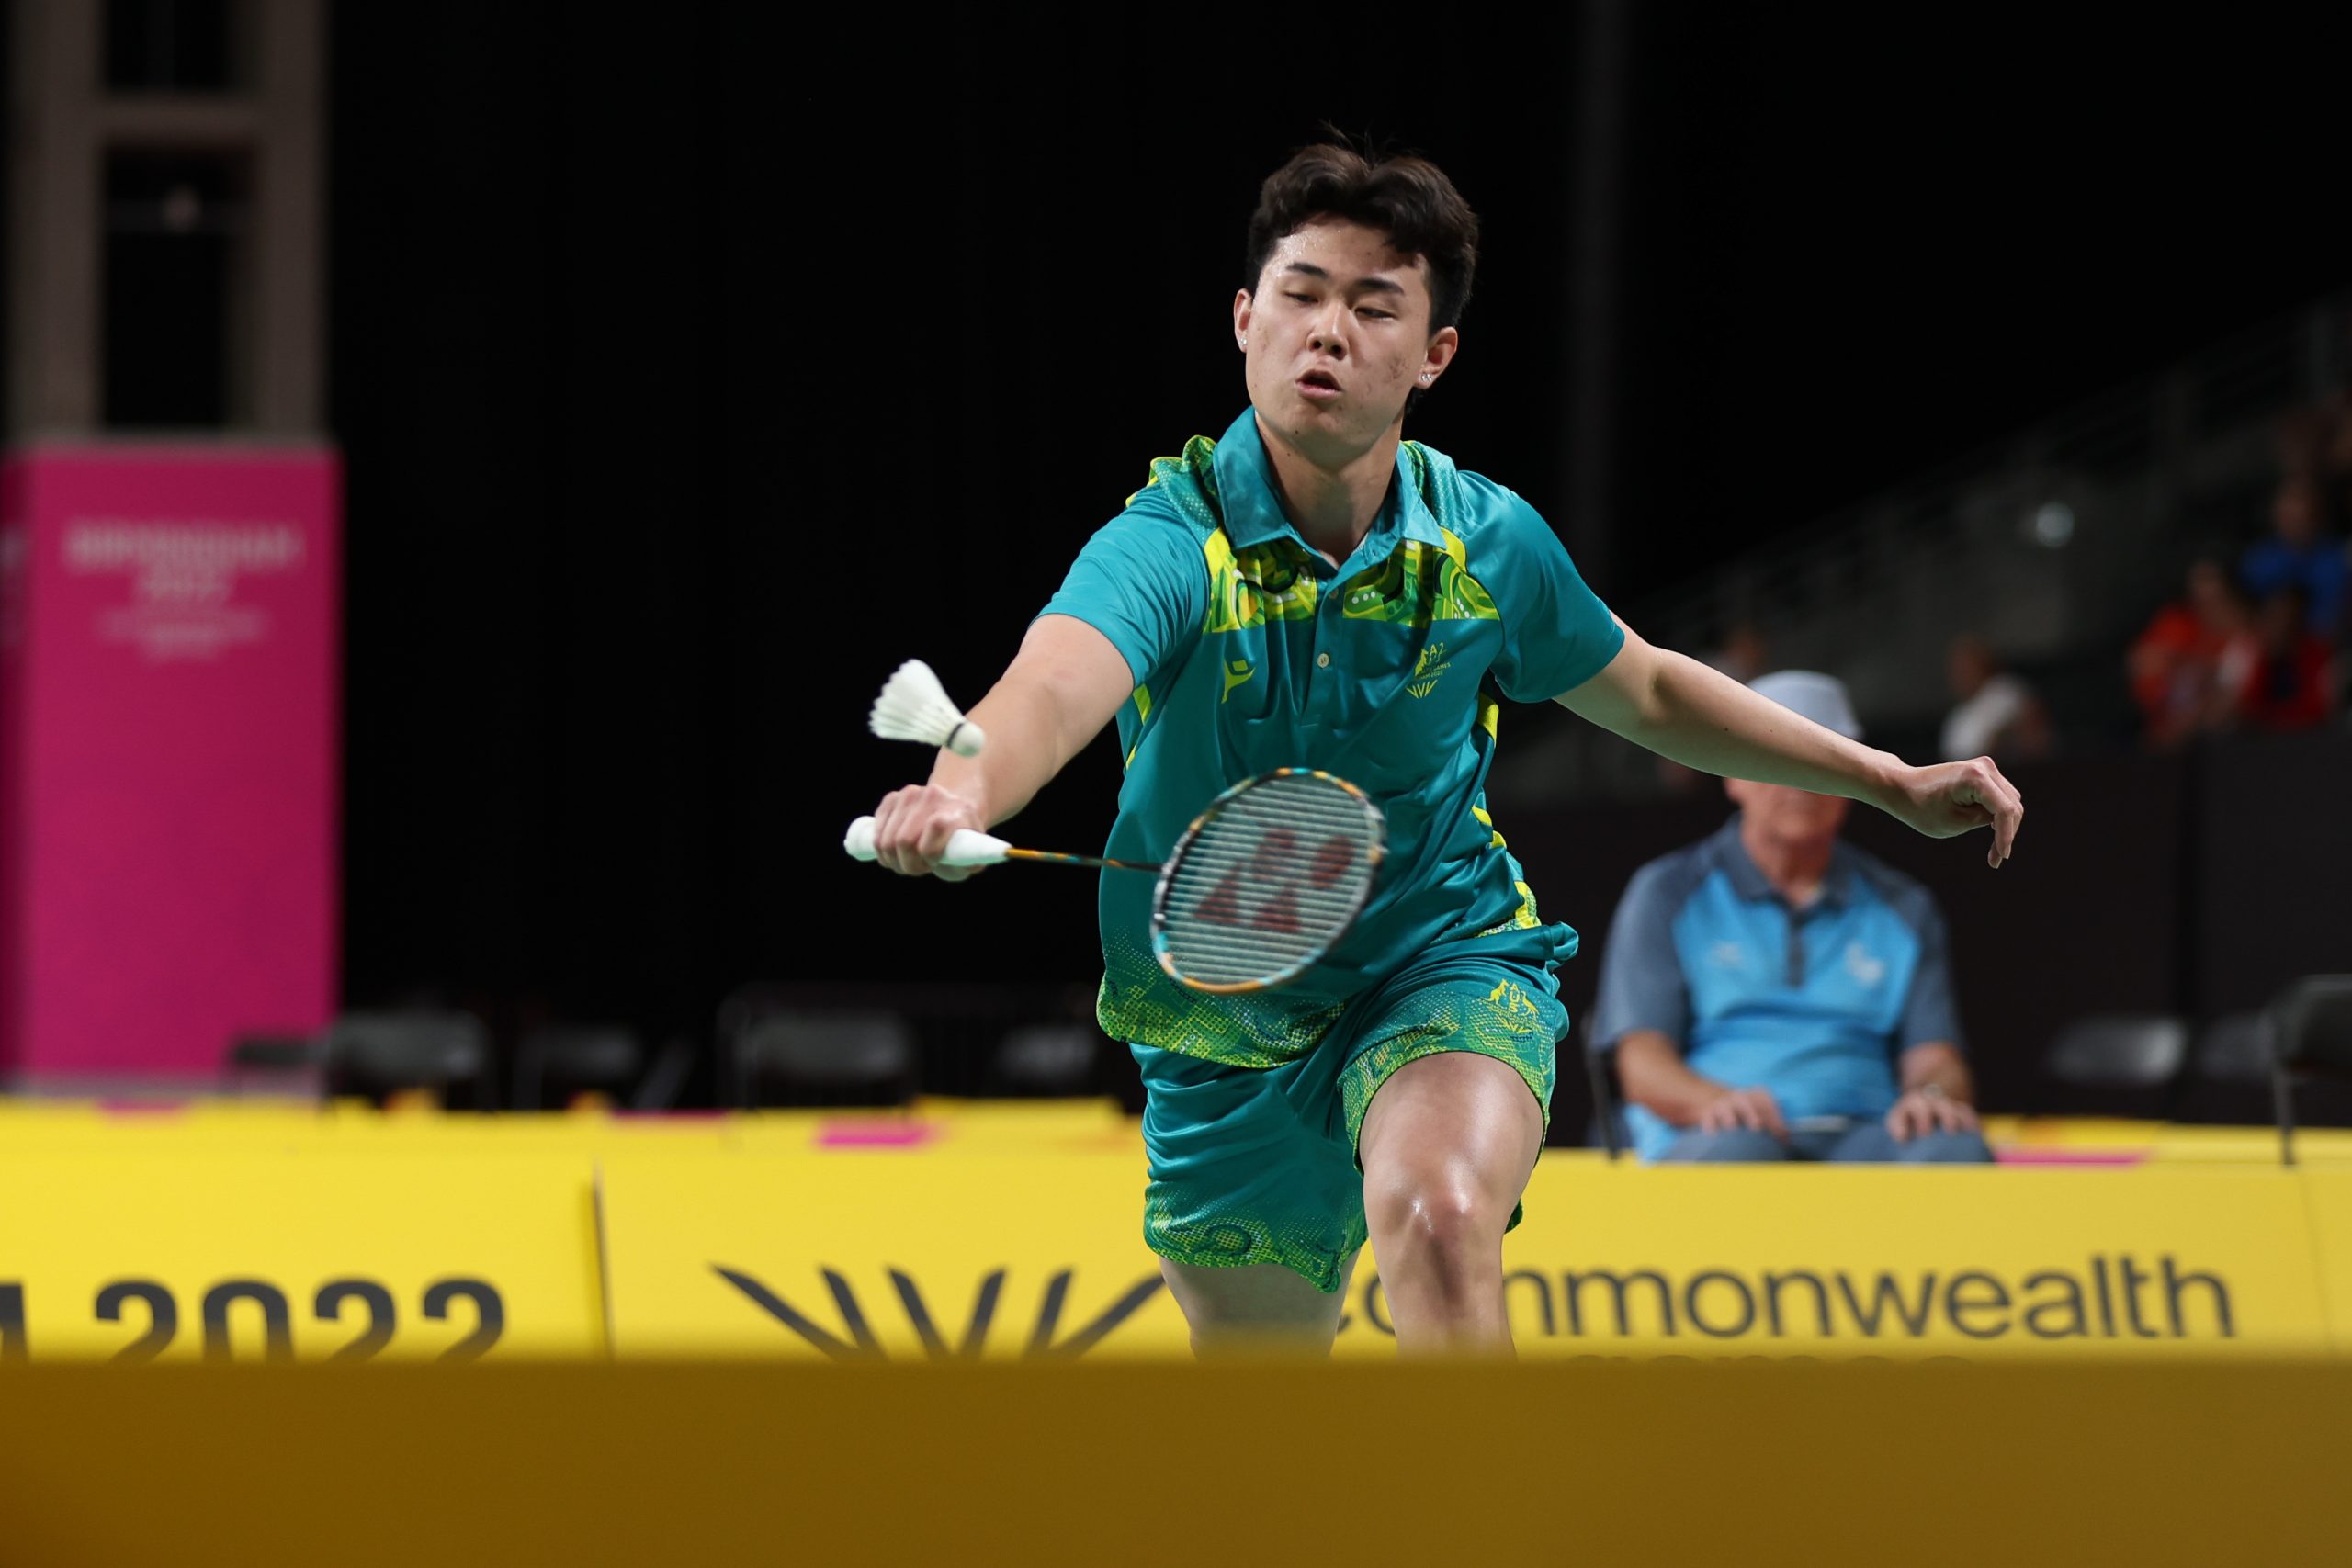 Mixed Results for Badminton on Day 2 as Aussies Knocked Out of the Mixed Team Event